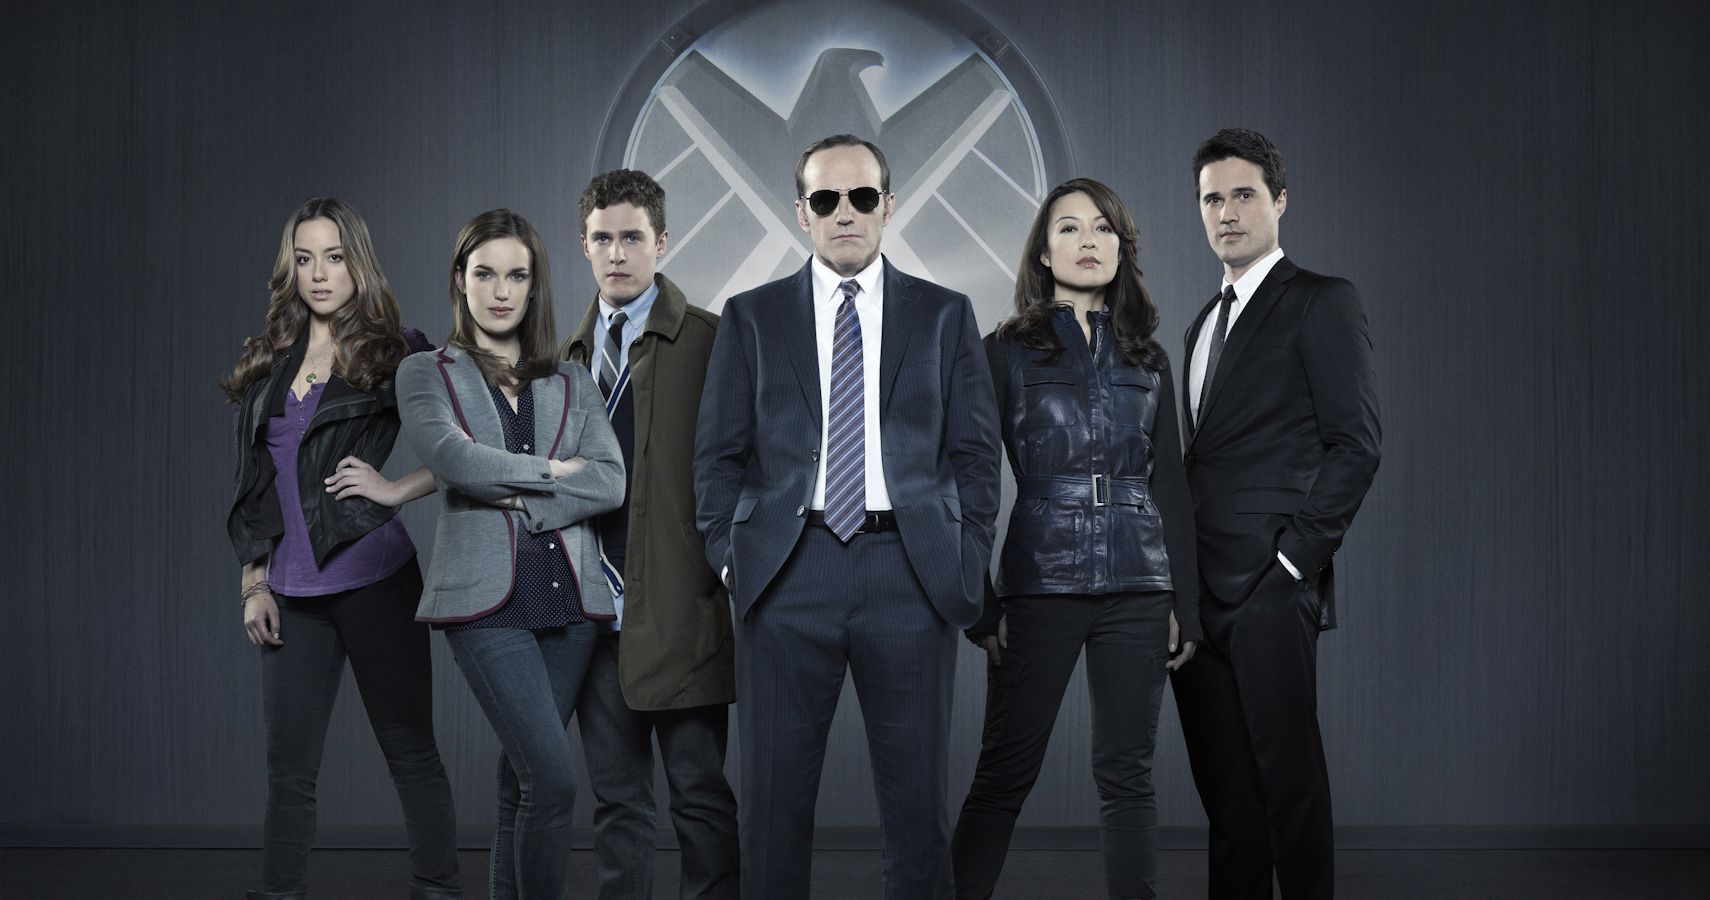 marvel agents of shield season 1 all episodes download